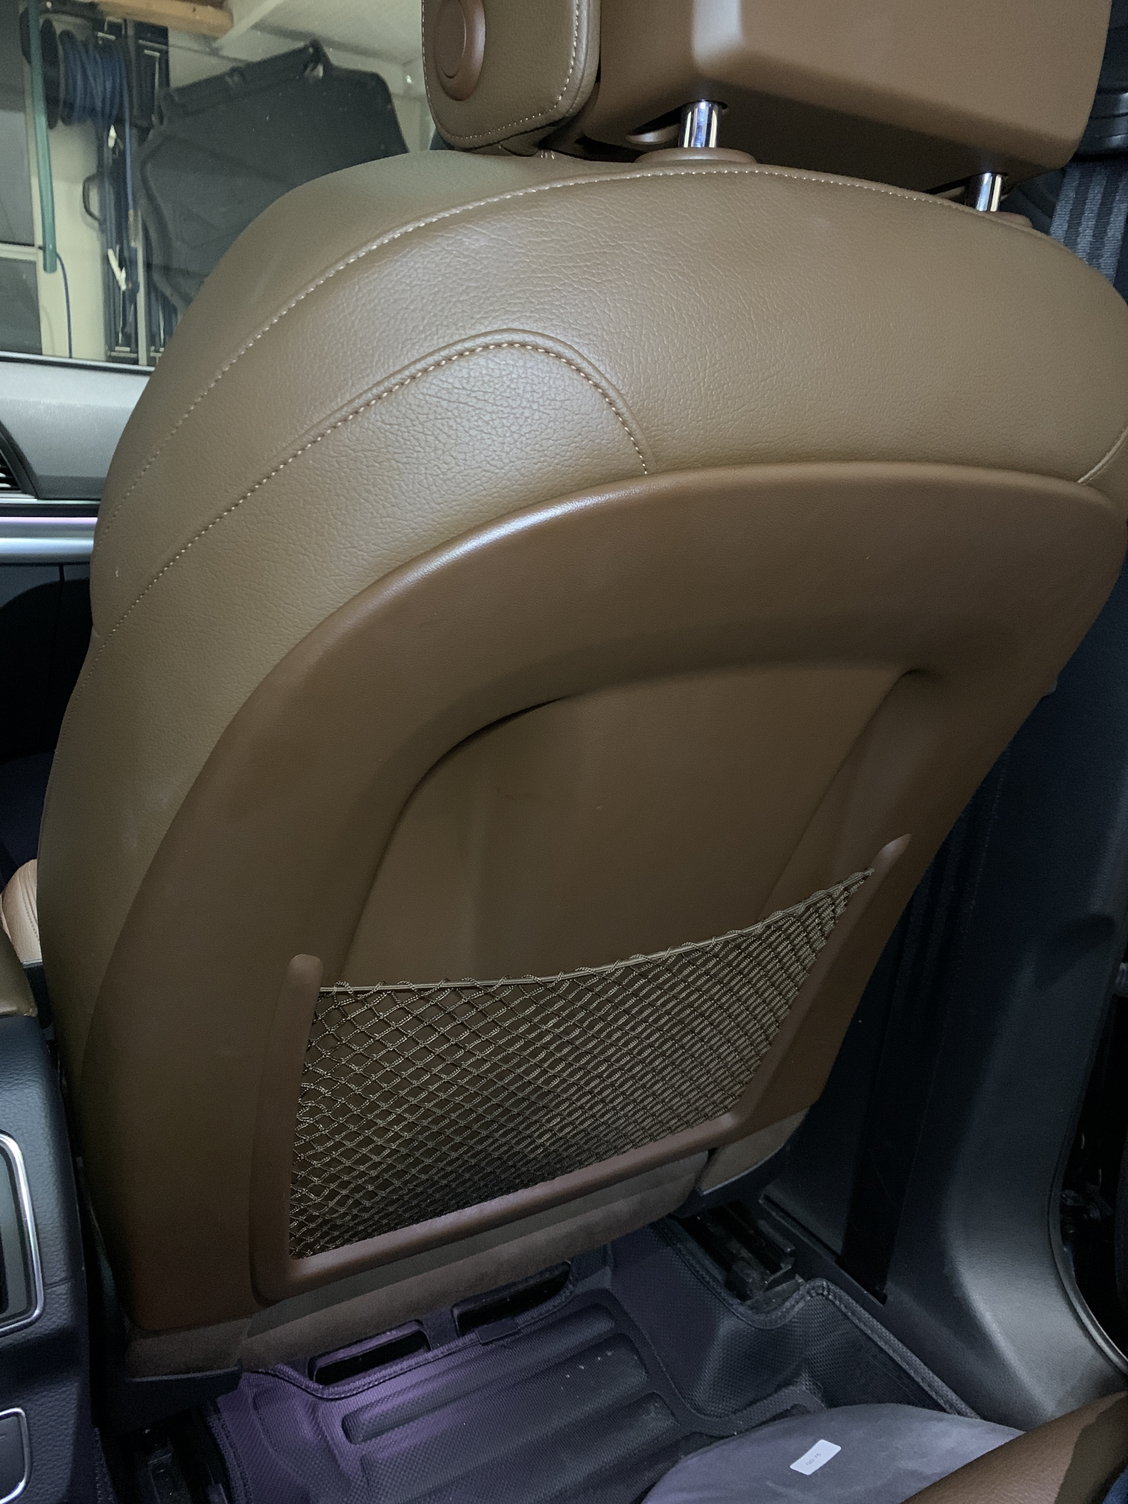 2018 Q5 Seat back cover removal - AudiWorld Forums